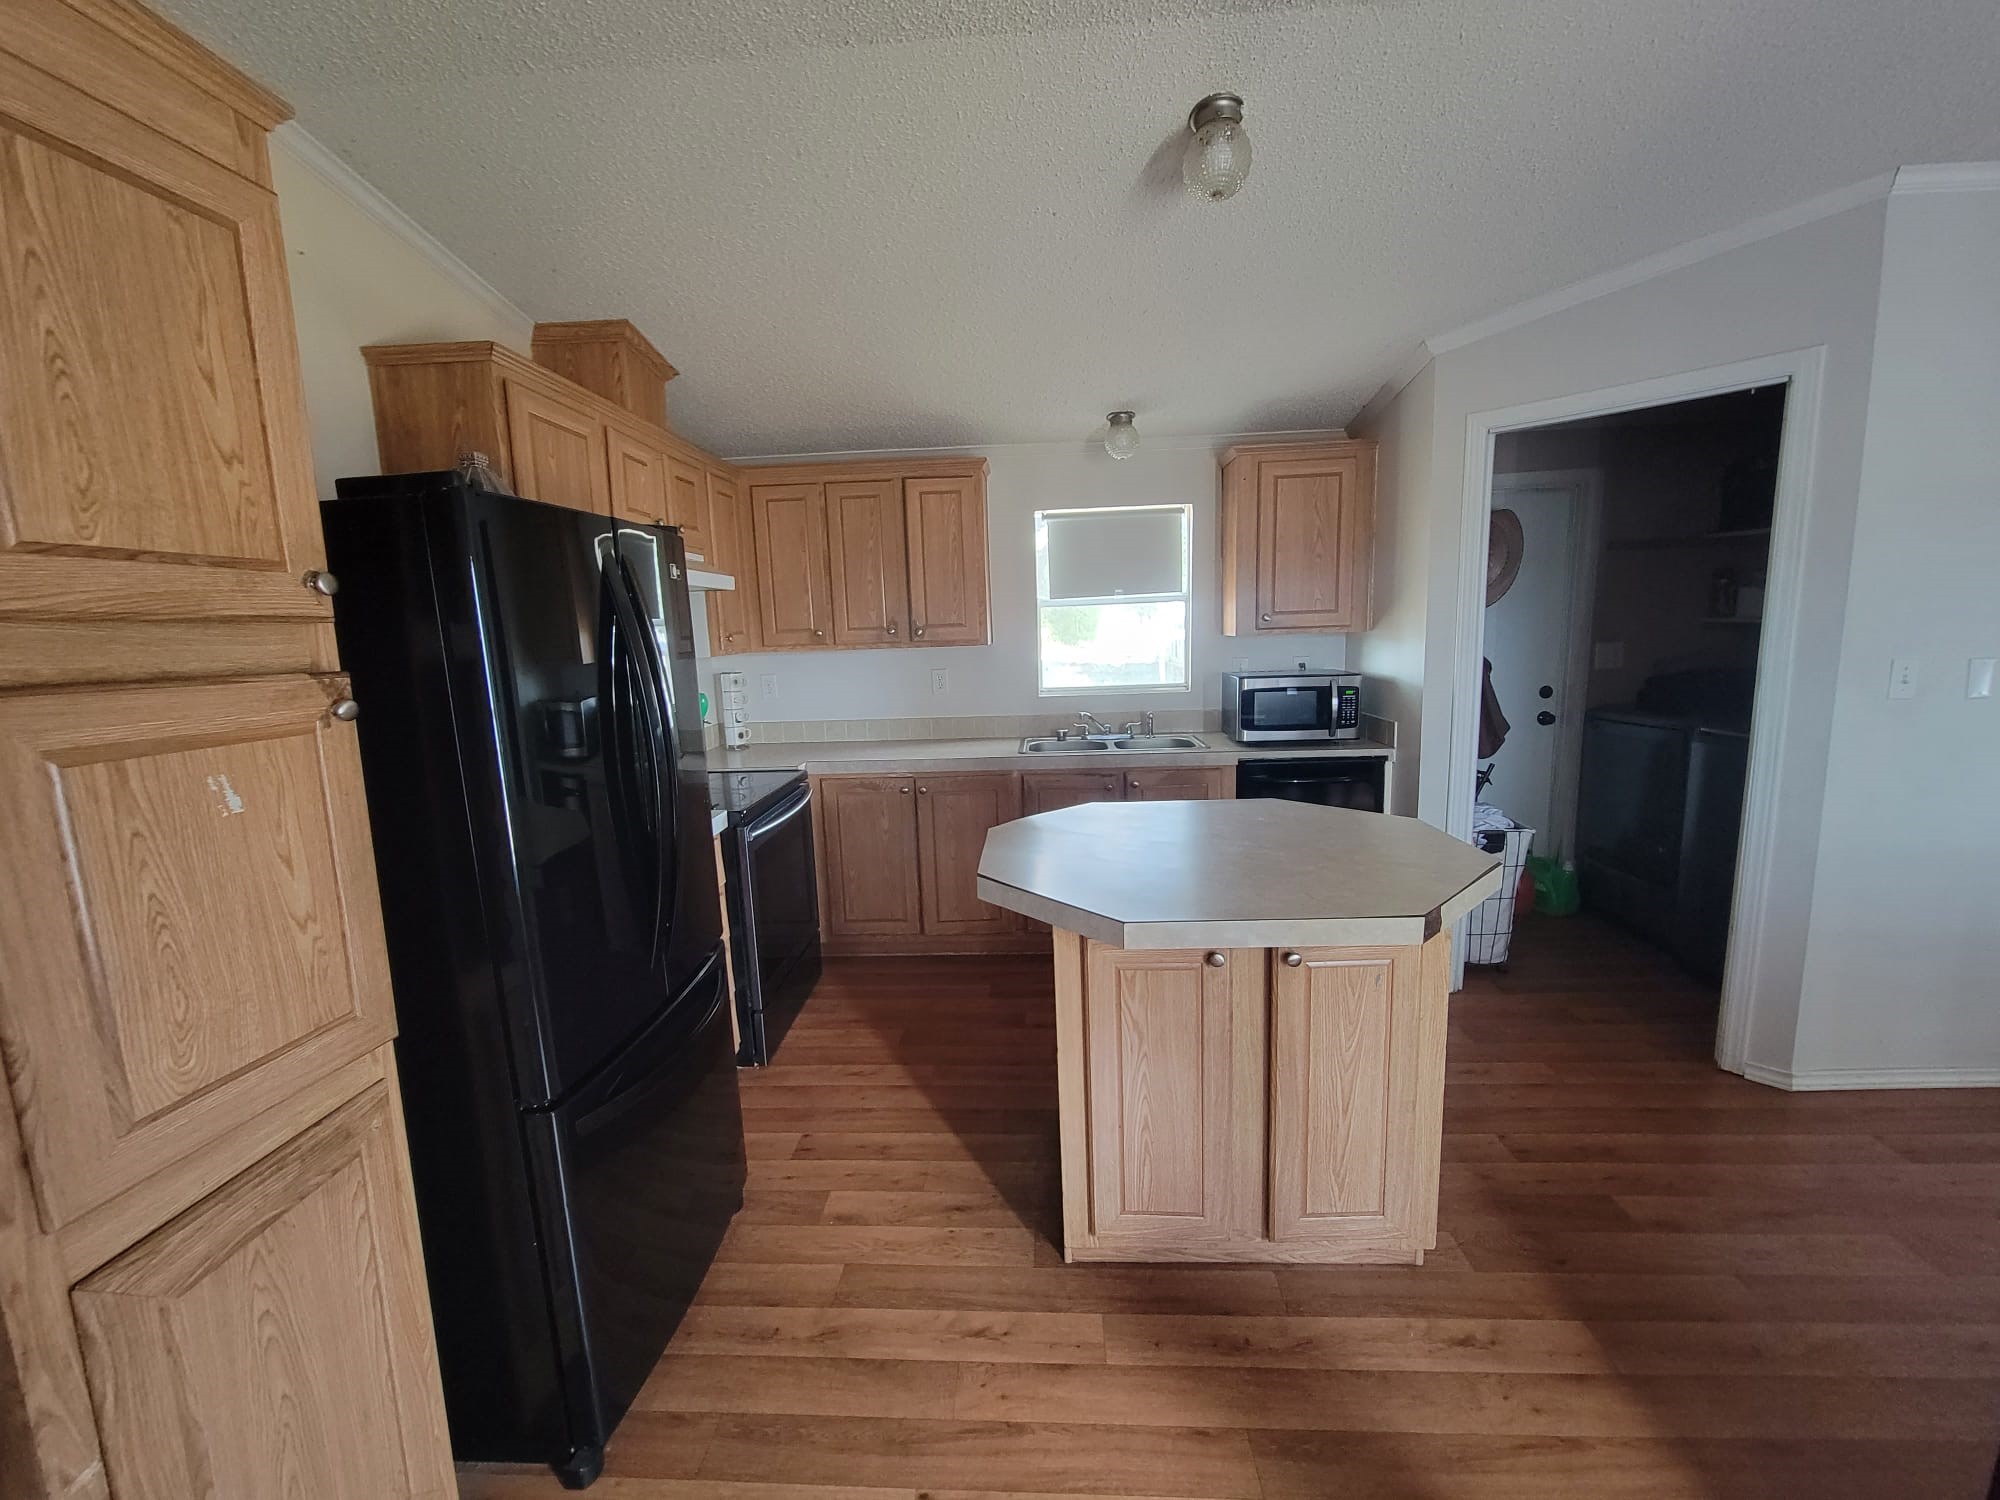 Open concept Kitchen with the laundry room conveniently located next to it!